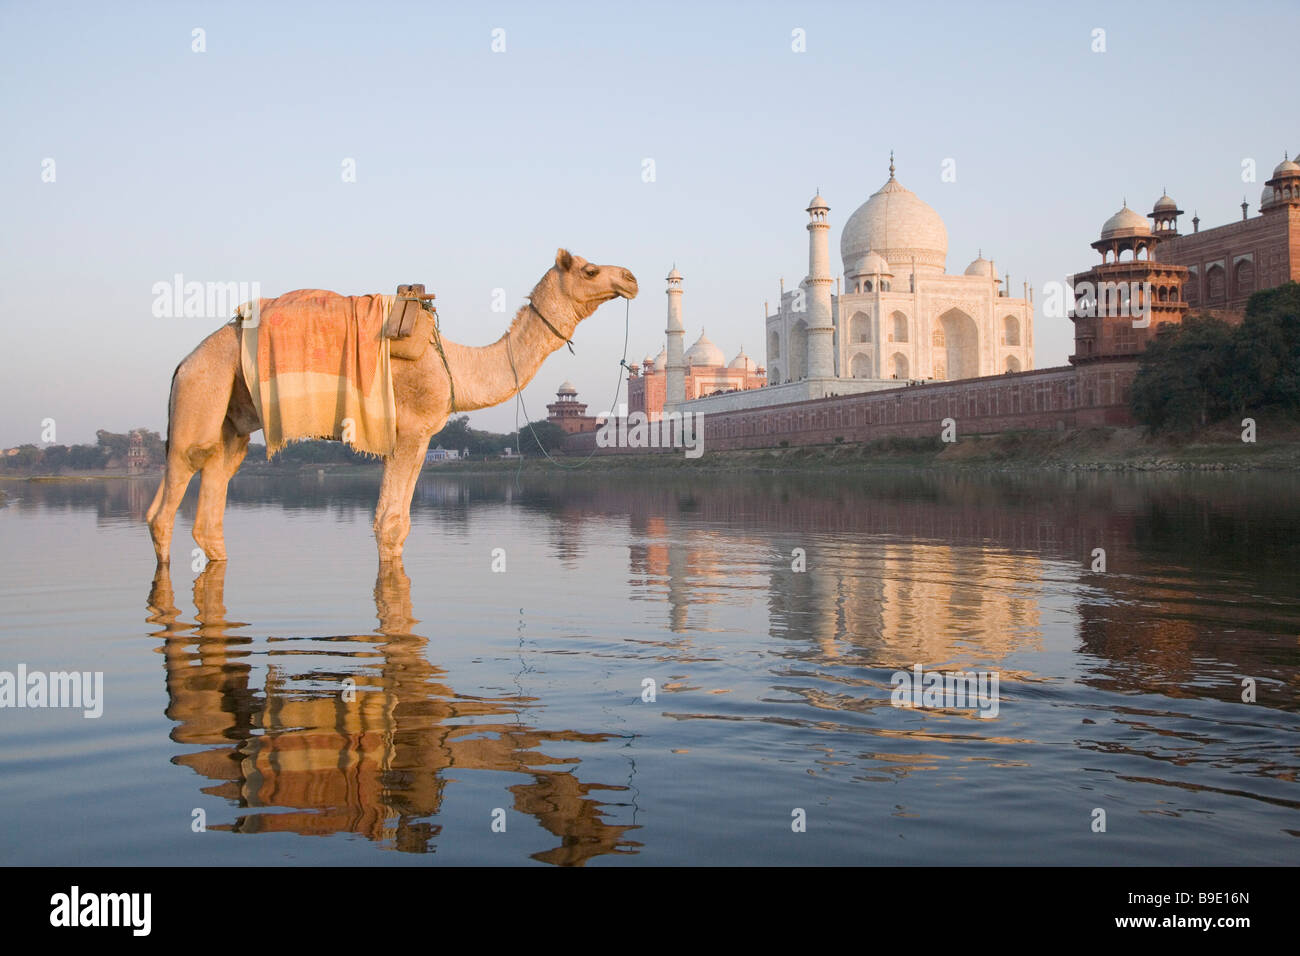 Camel in the river with a mausoleum in the background, Taj Mahal, Yamuna River, Agra, Uttar Pradesh, India Stock Photo